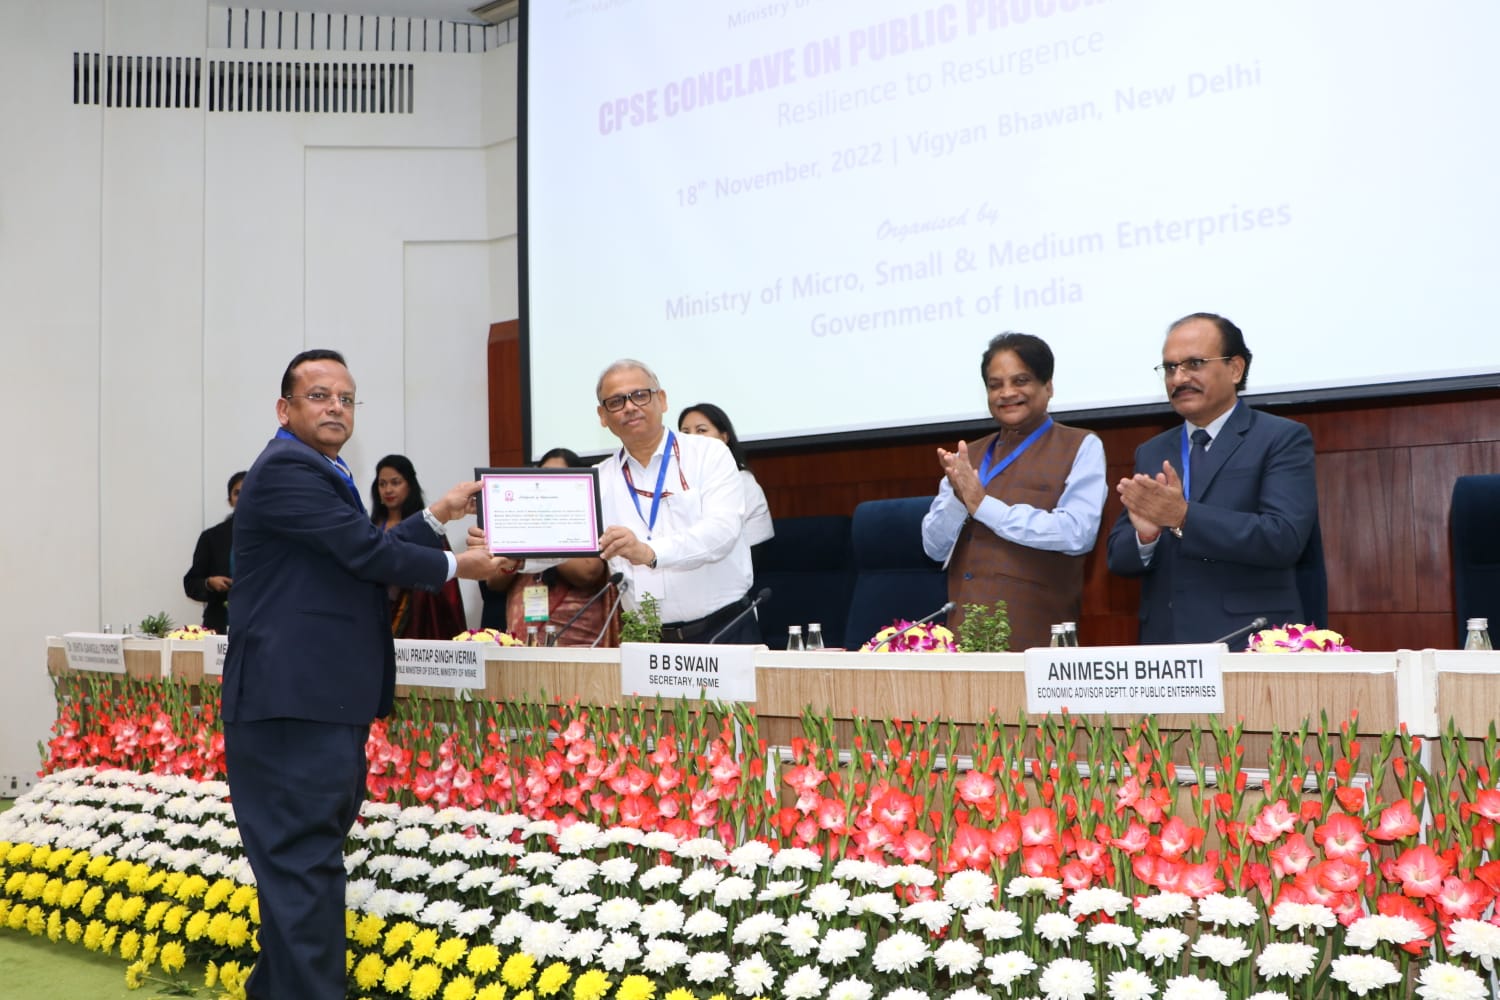 Dignitaries on the dias felicitating the CPSEs for their achievements in Public Procurement through SC-ST MSEs in the CPSE conclave held on 18th November 2022 at Vigyan Bhawan, Delhi.jpg